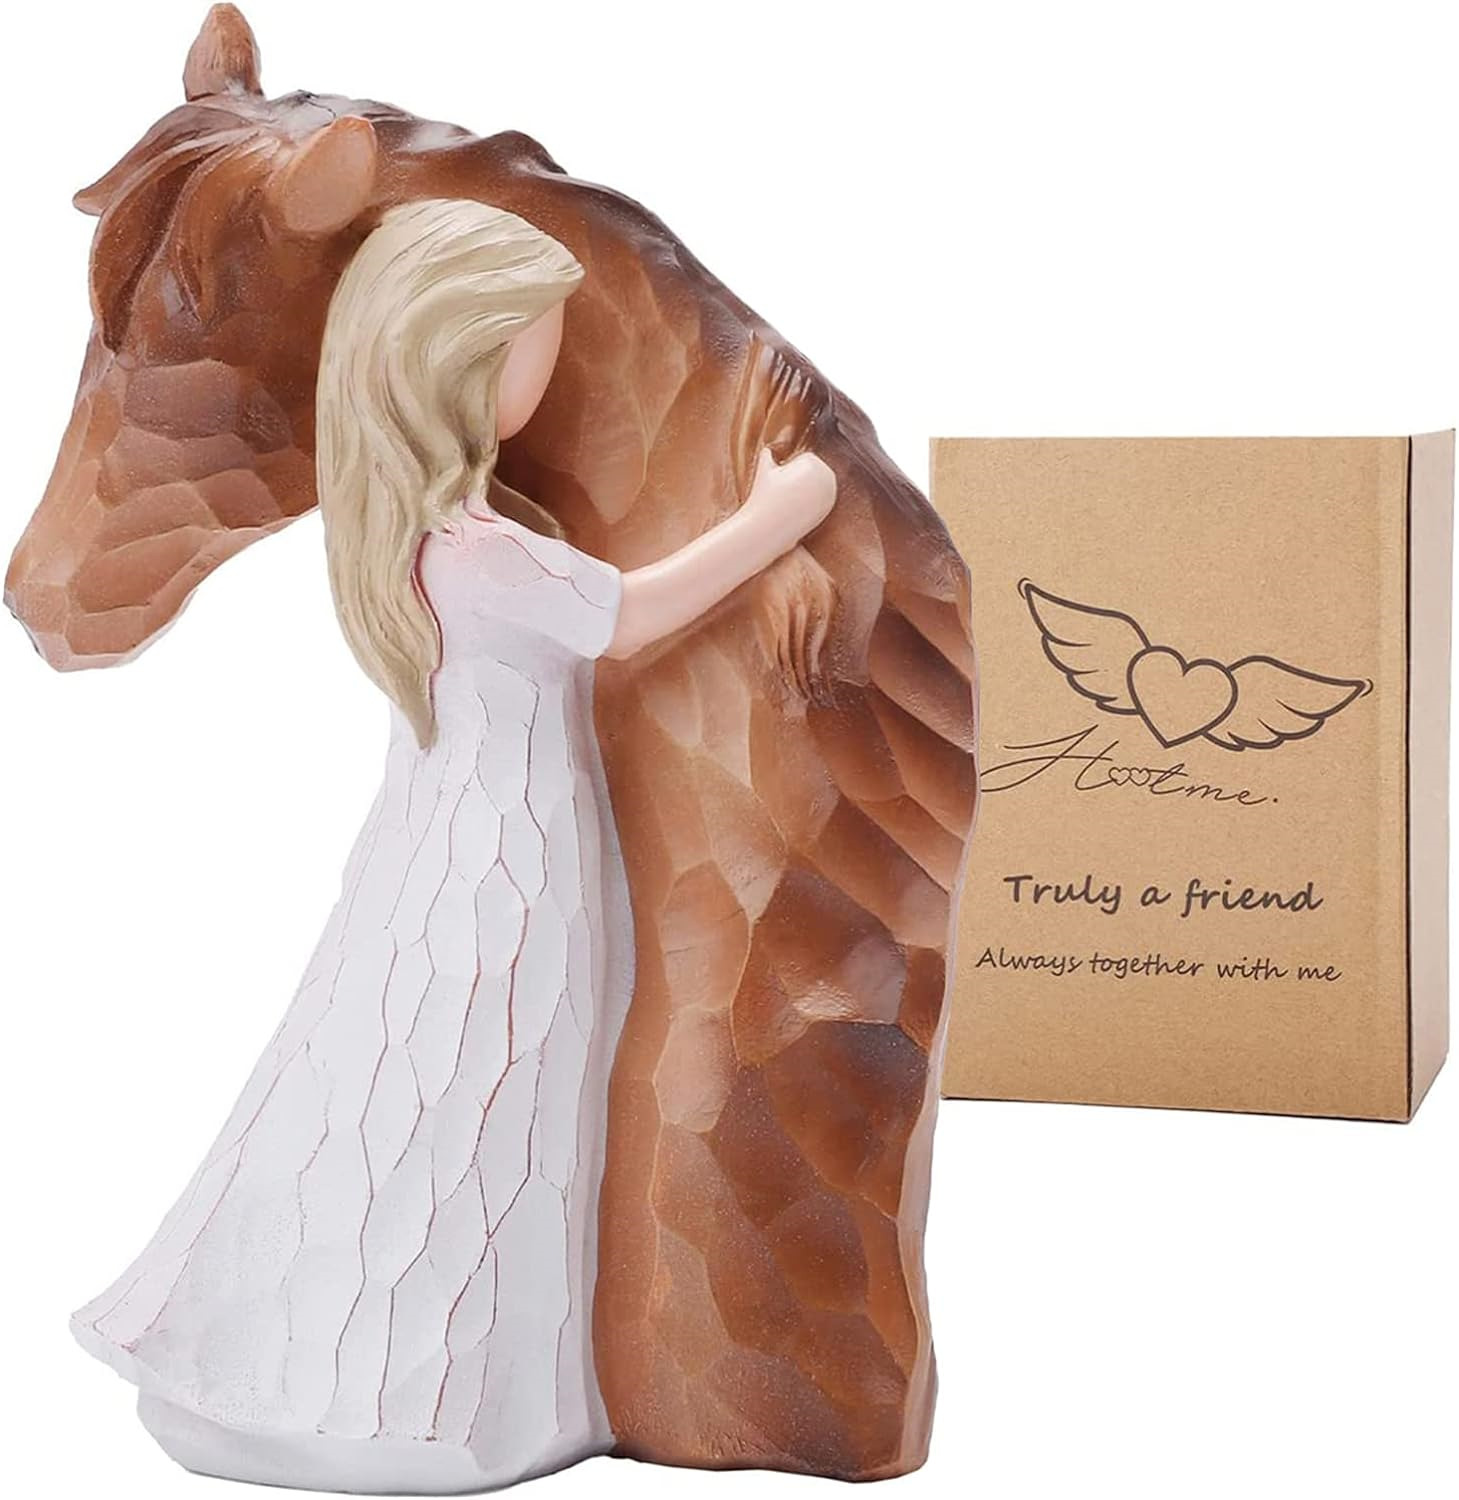 Figurine Gifts for Women Horse Lovers, Girl Embrace Horse Statue Decor Hand-Pain